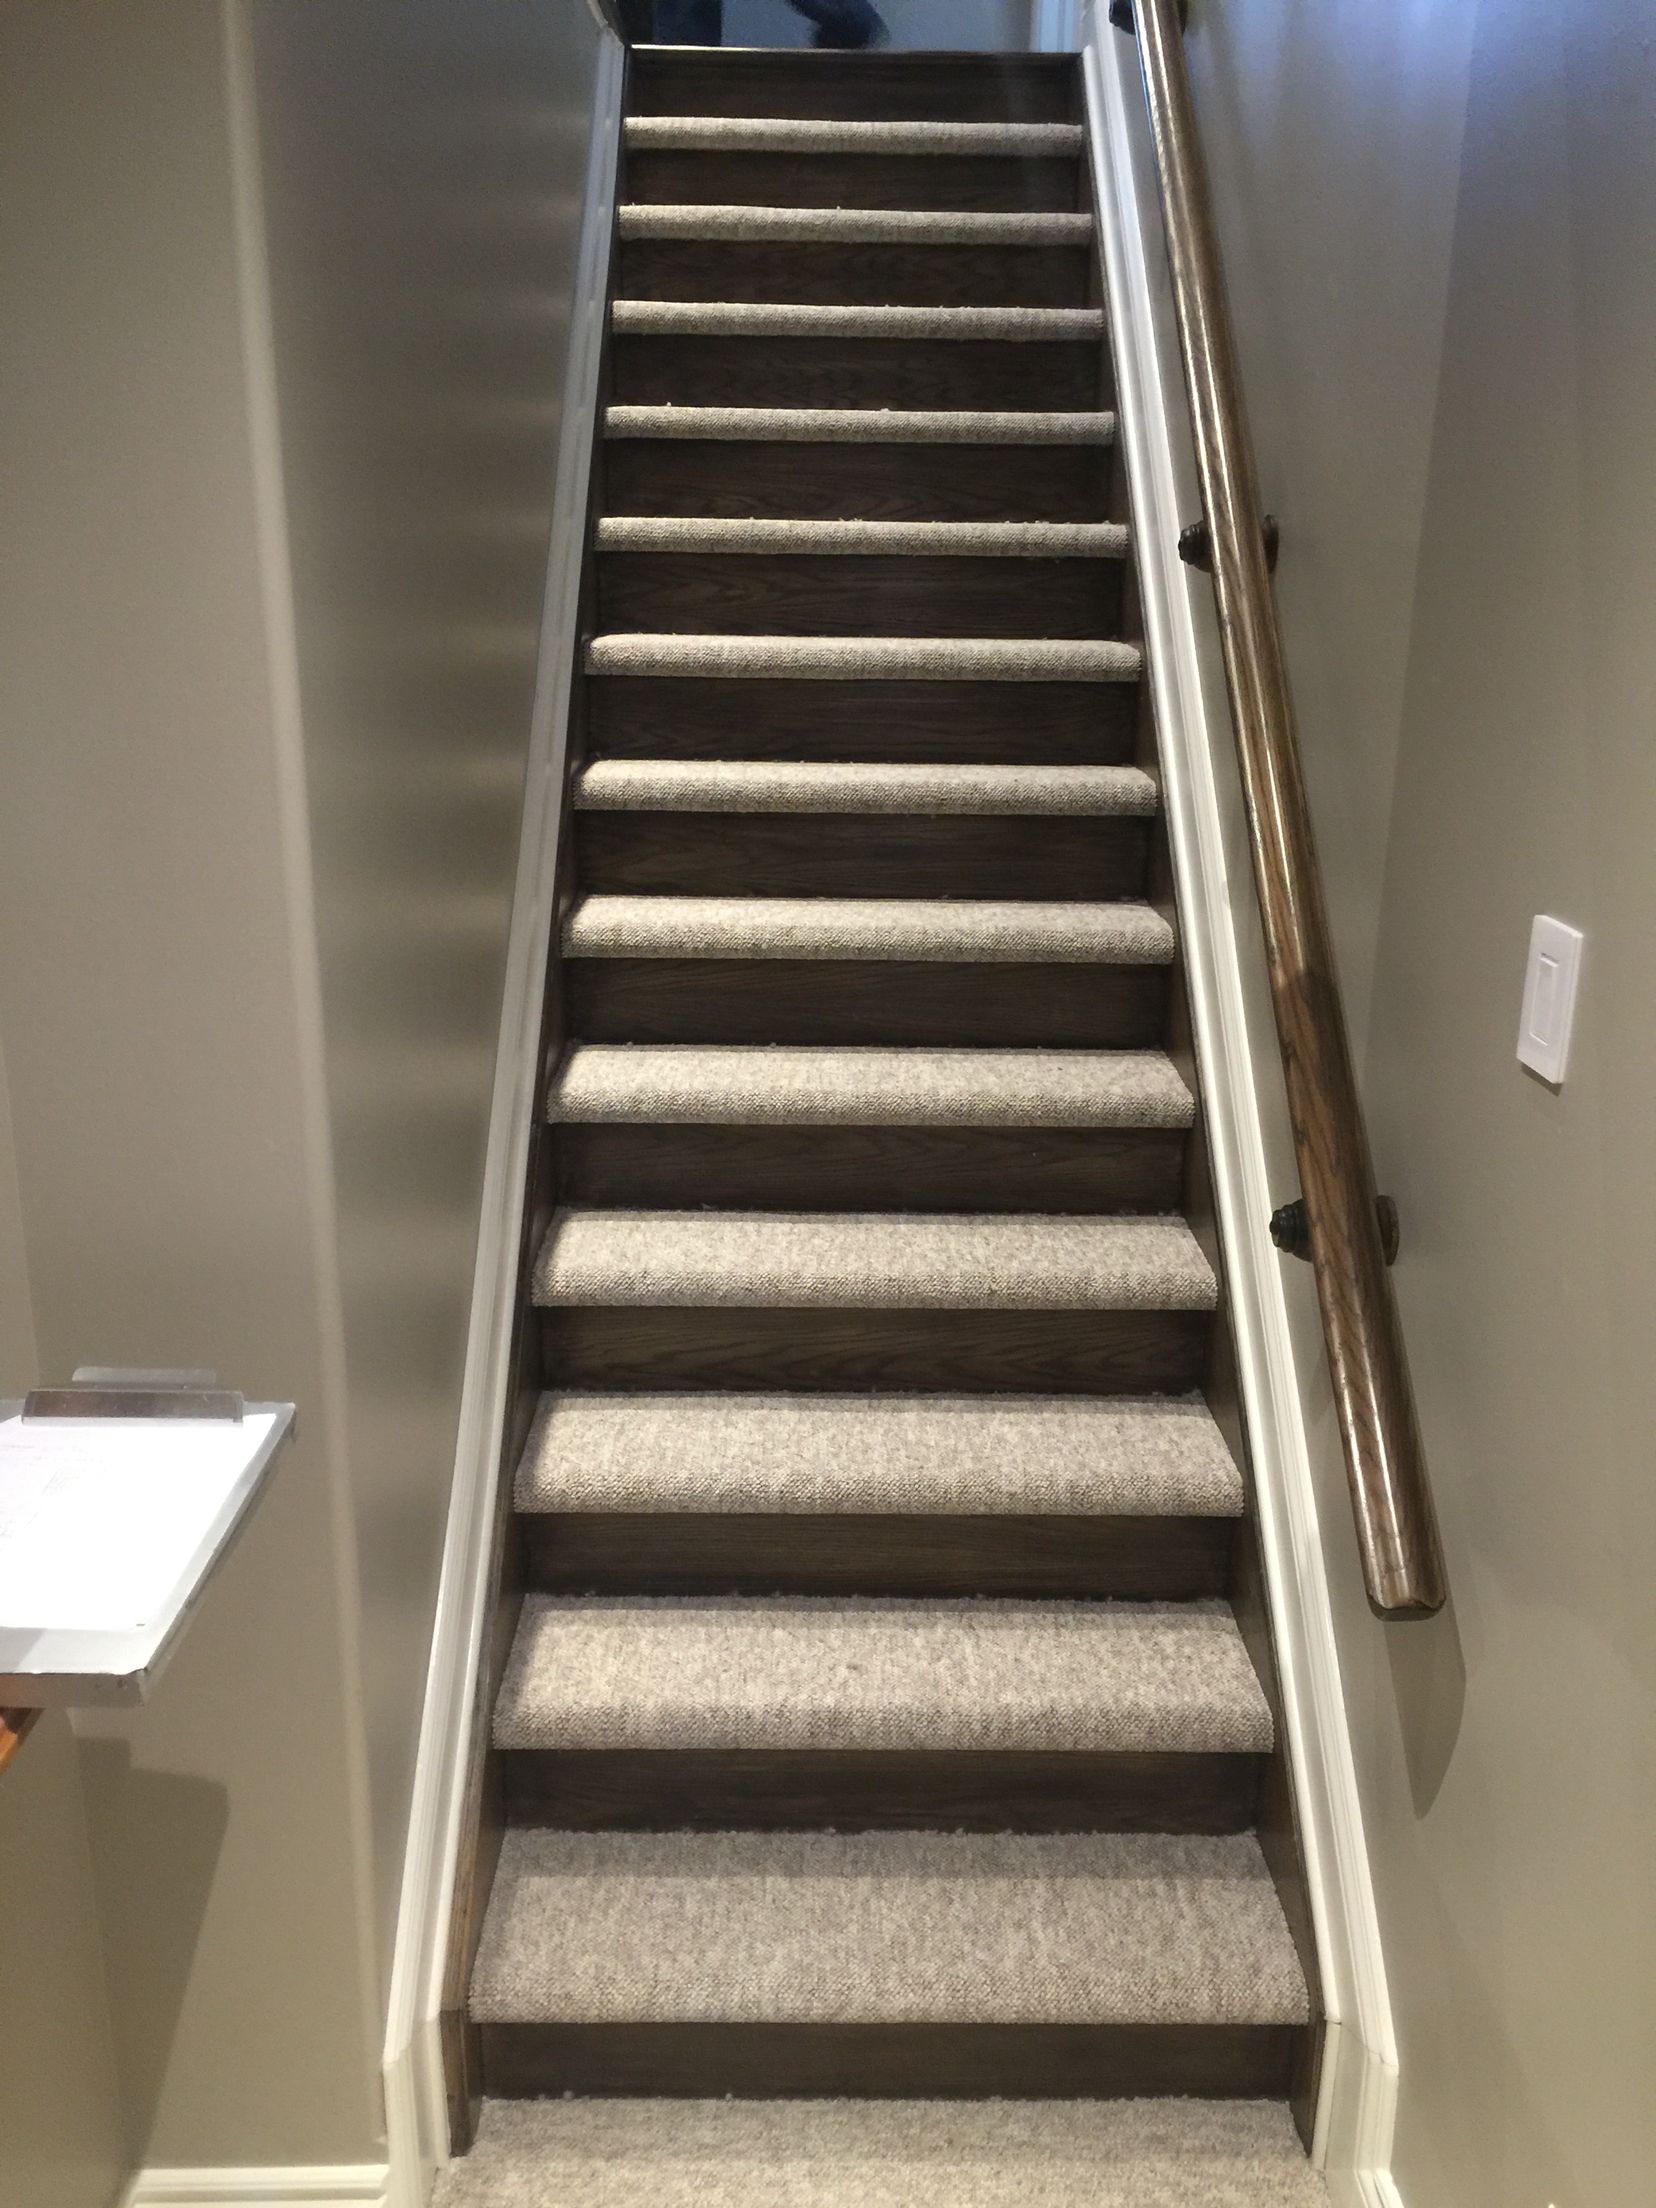 Closed stairs, carpet and wood risers | Stairs and Floor | Pinterest ...